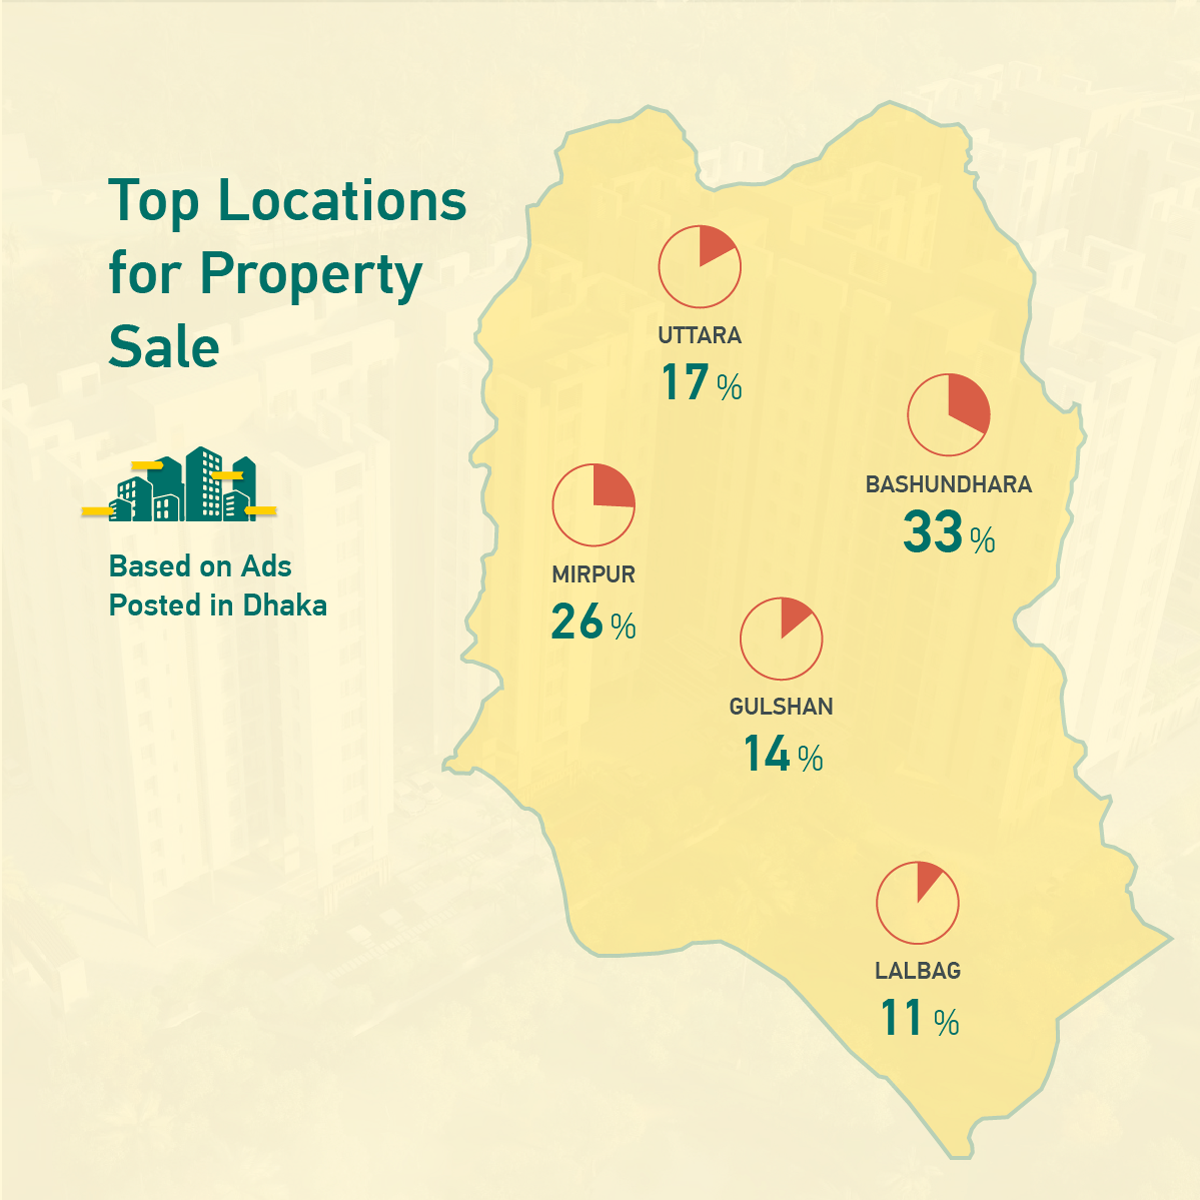 Top Locations for Property Sale